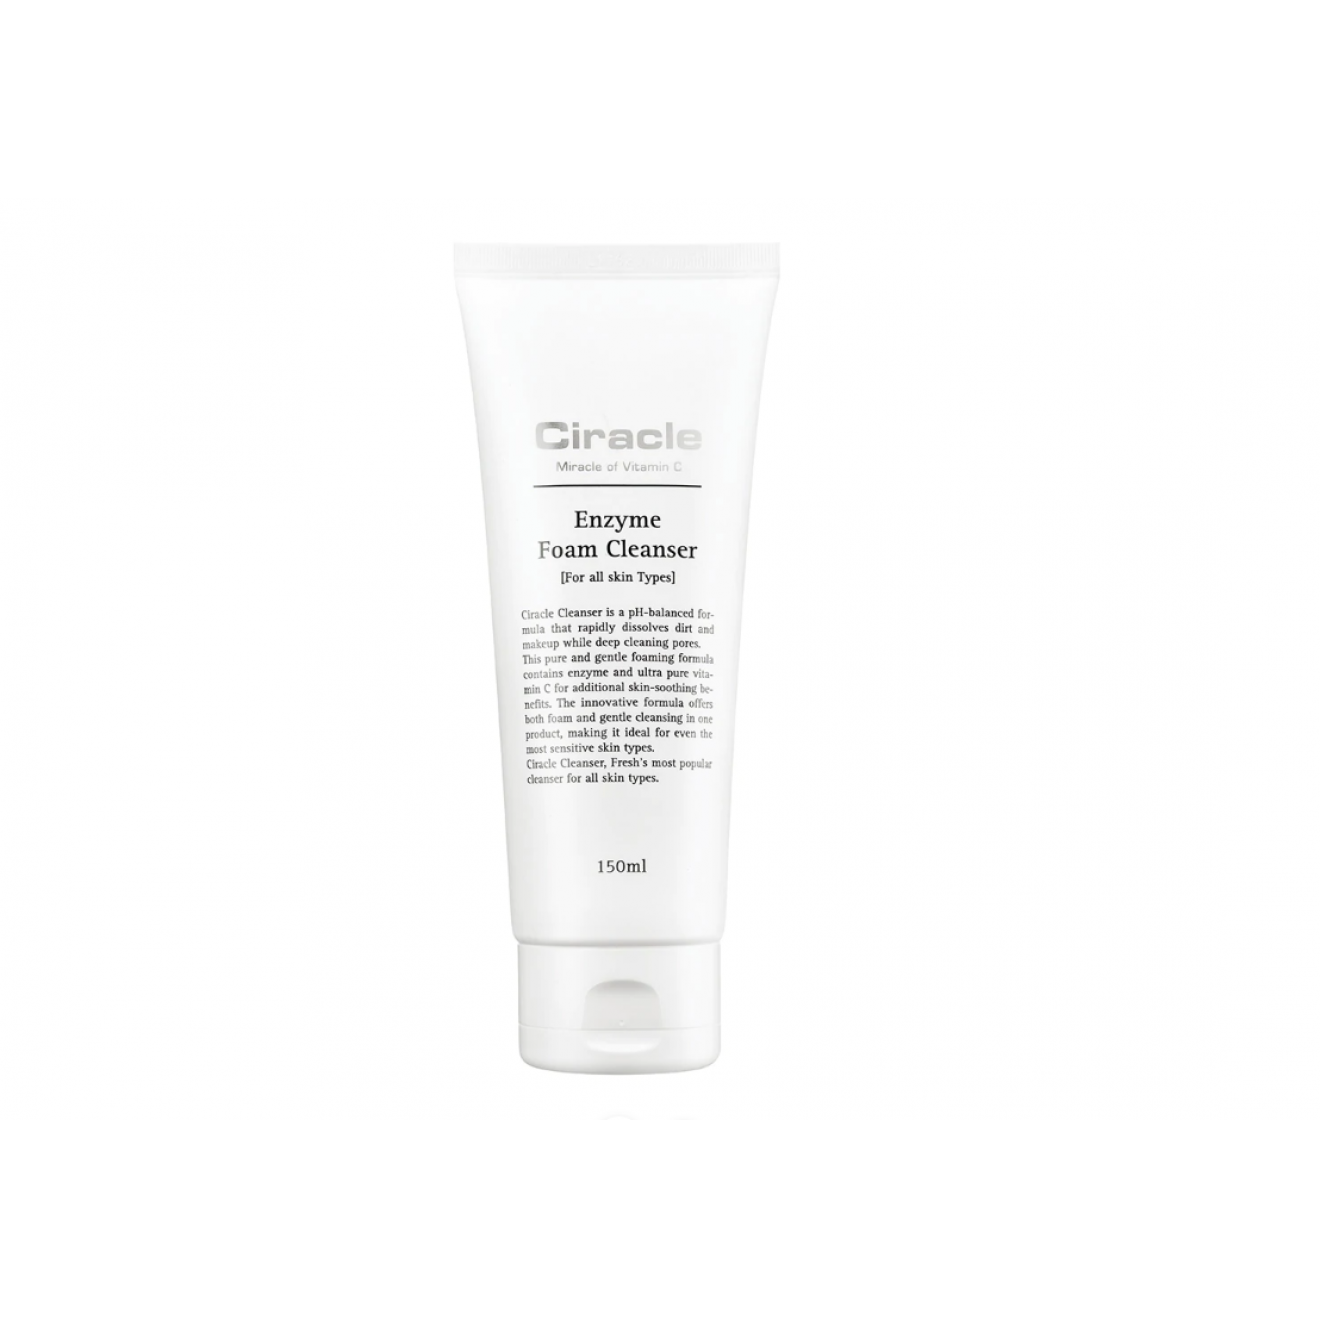 Ciracle Enzyme Foam Cleanser, 150 мл